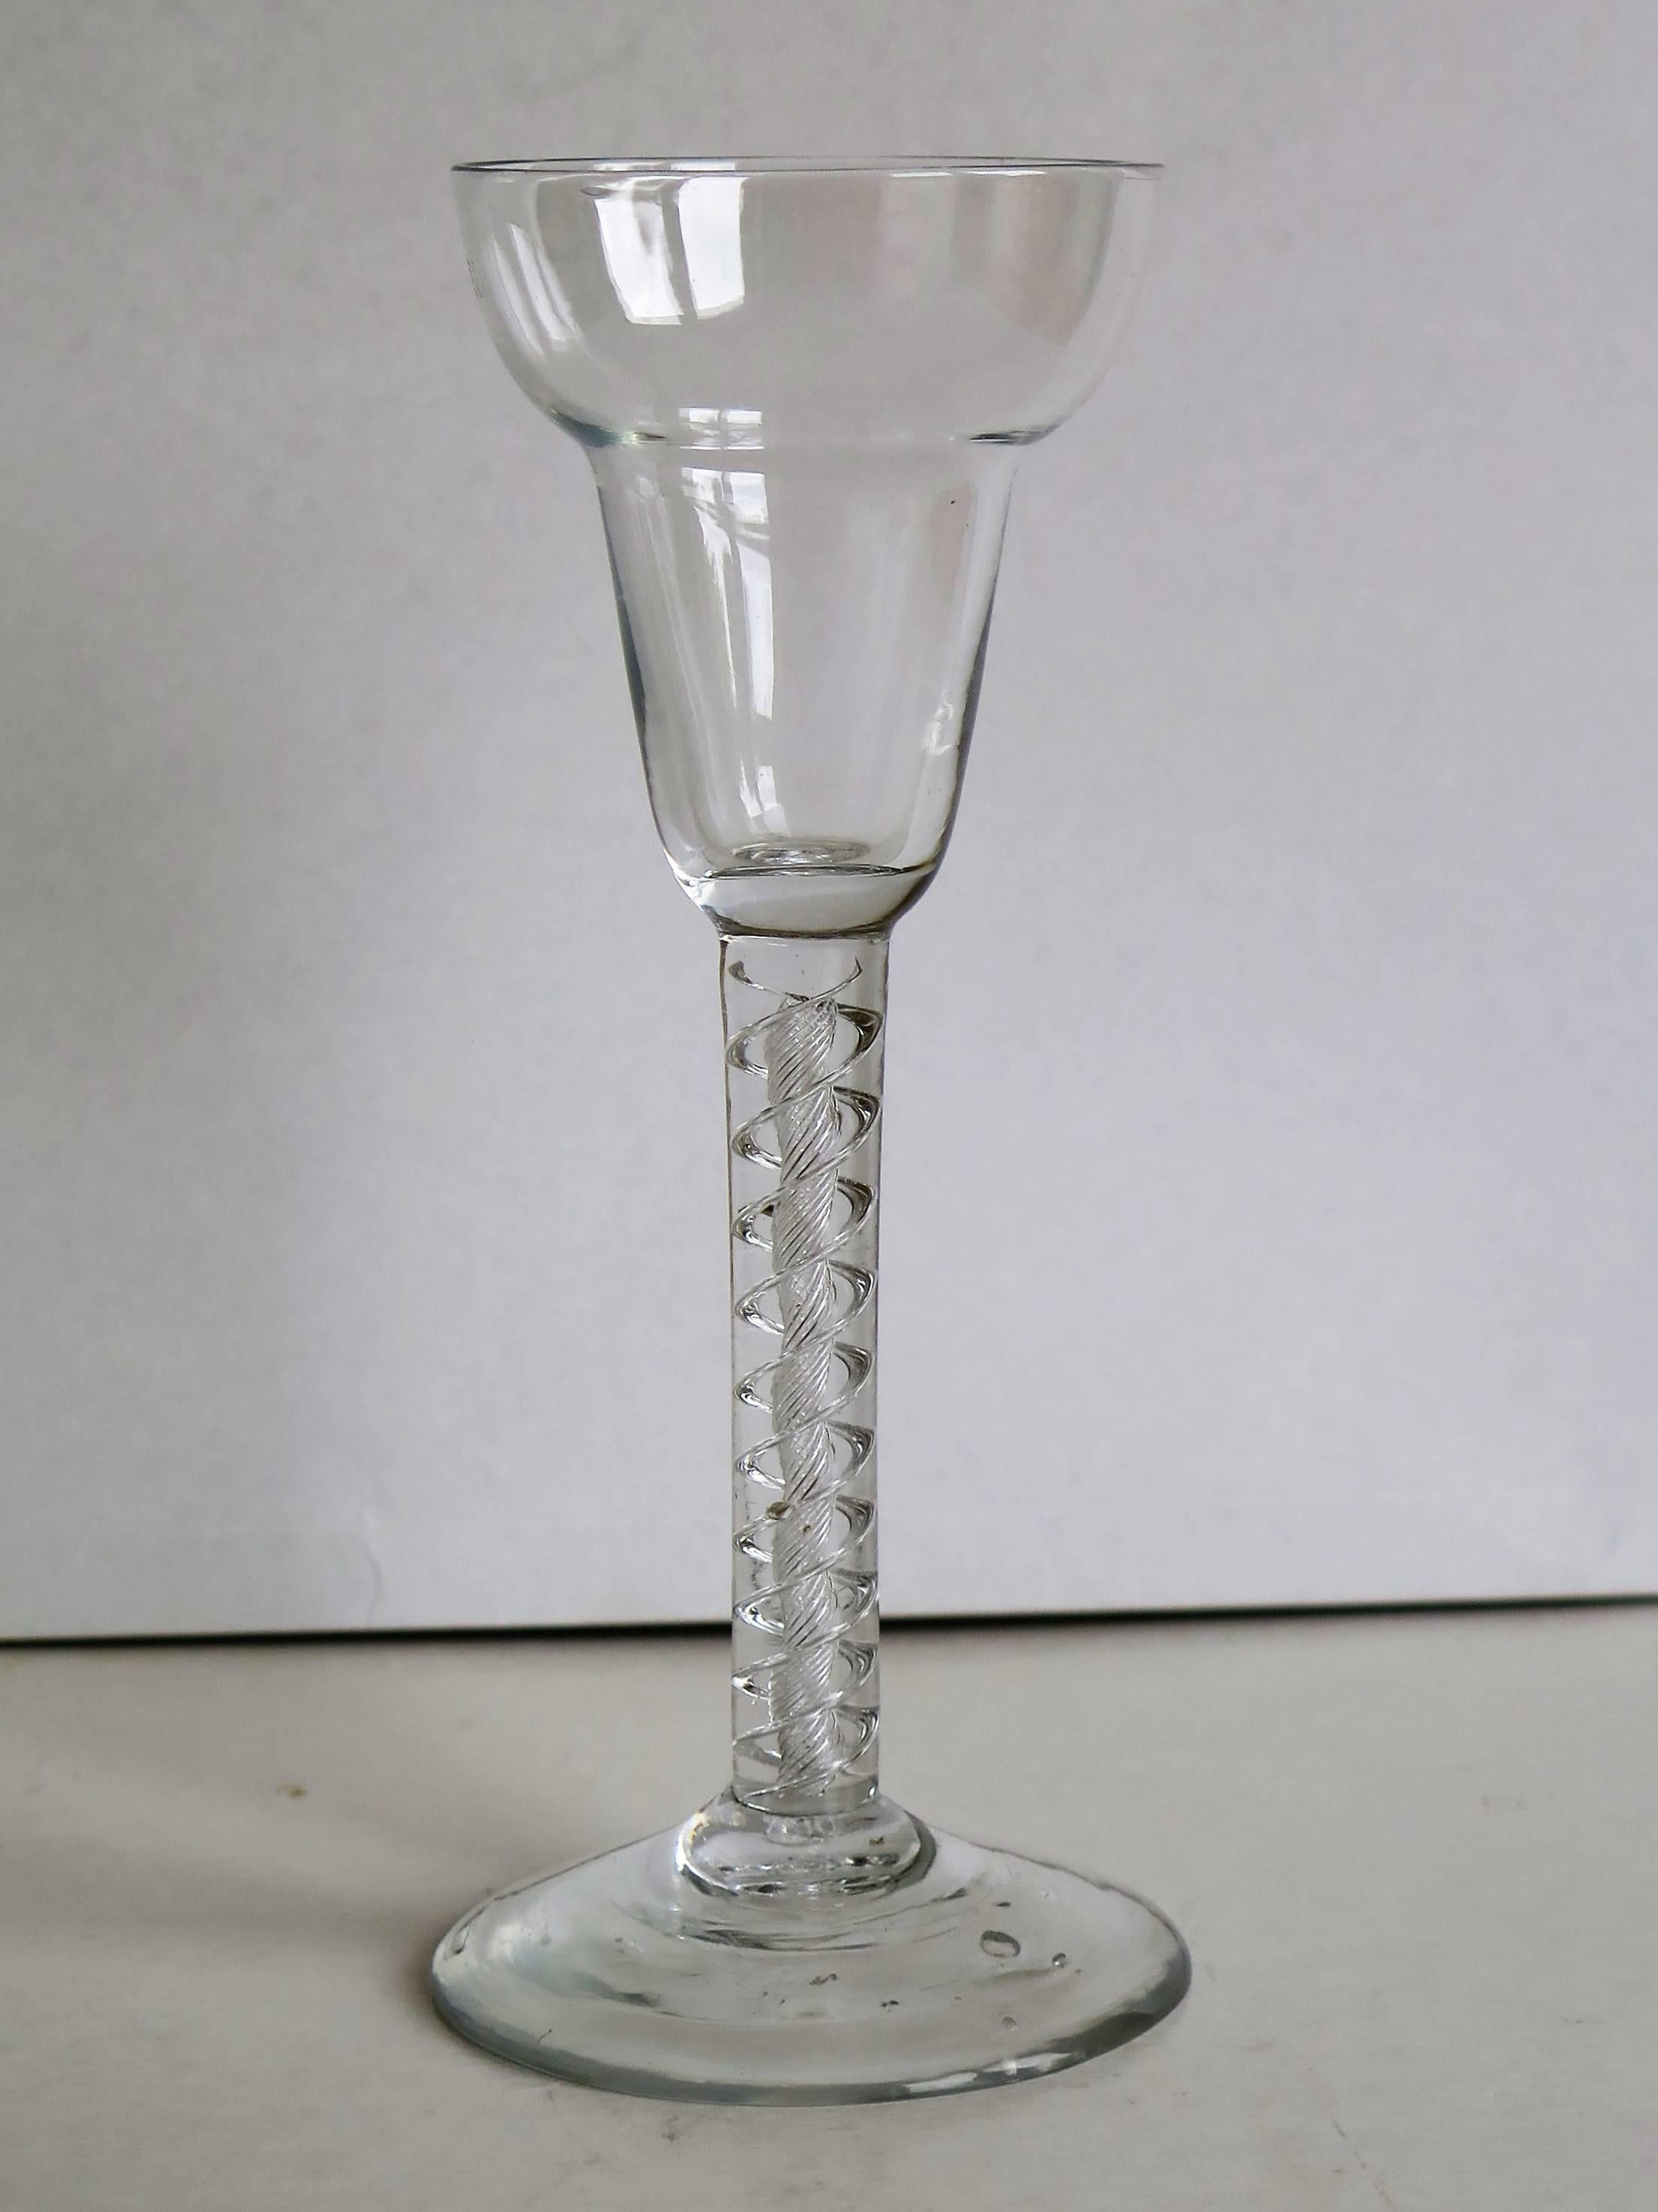 This is a superb English, mid-Georgian, Handblown, wine drinking glass, with a 'Mercury' Air Twist stem and a rare bowl shape, dating to the middle of the 18th century George 11nd period, Circa 1750 / 1755.

These glasses are very collectable.

It